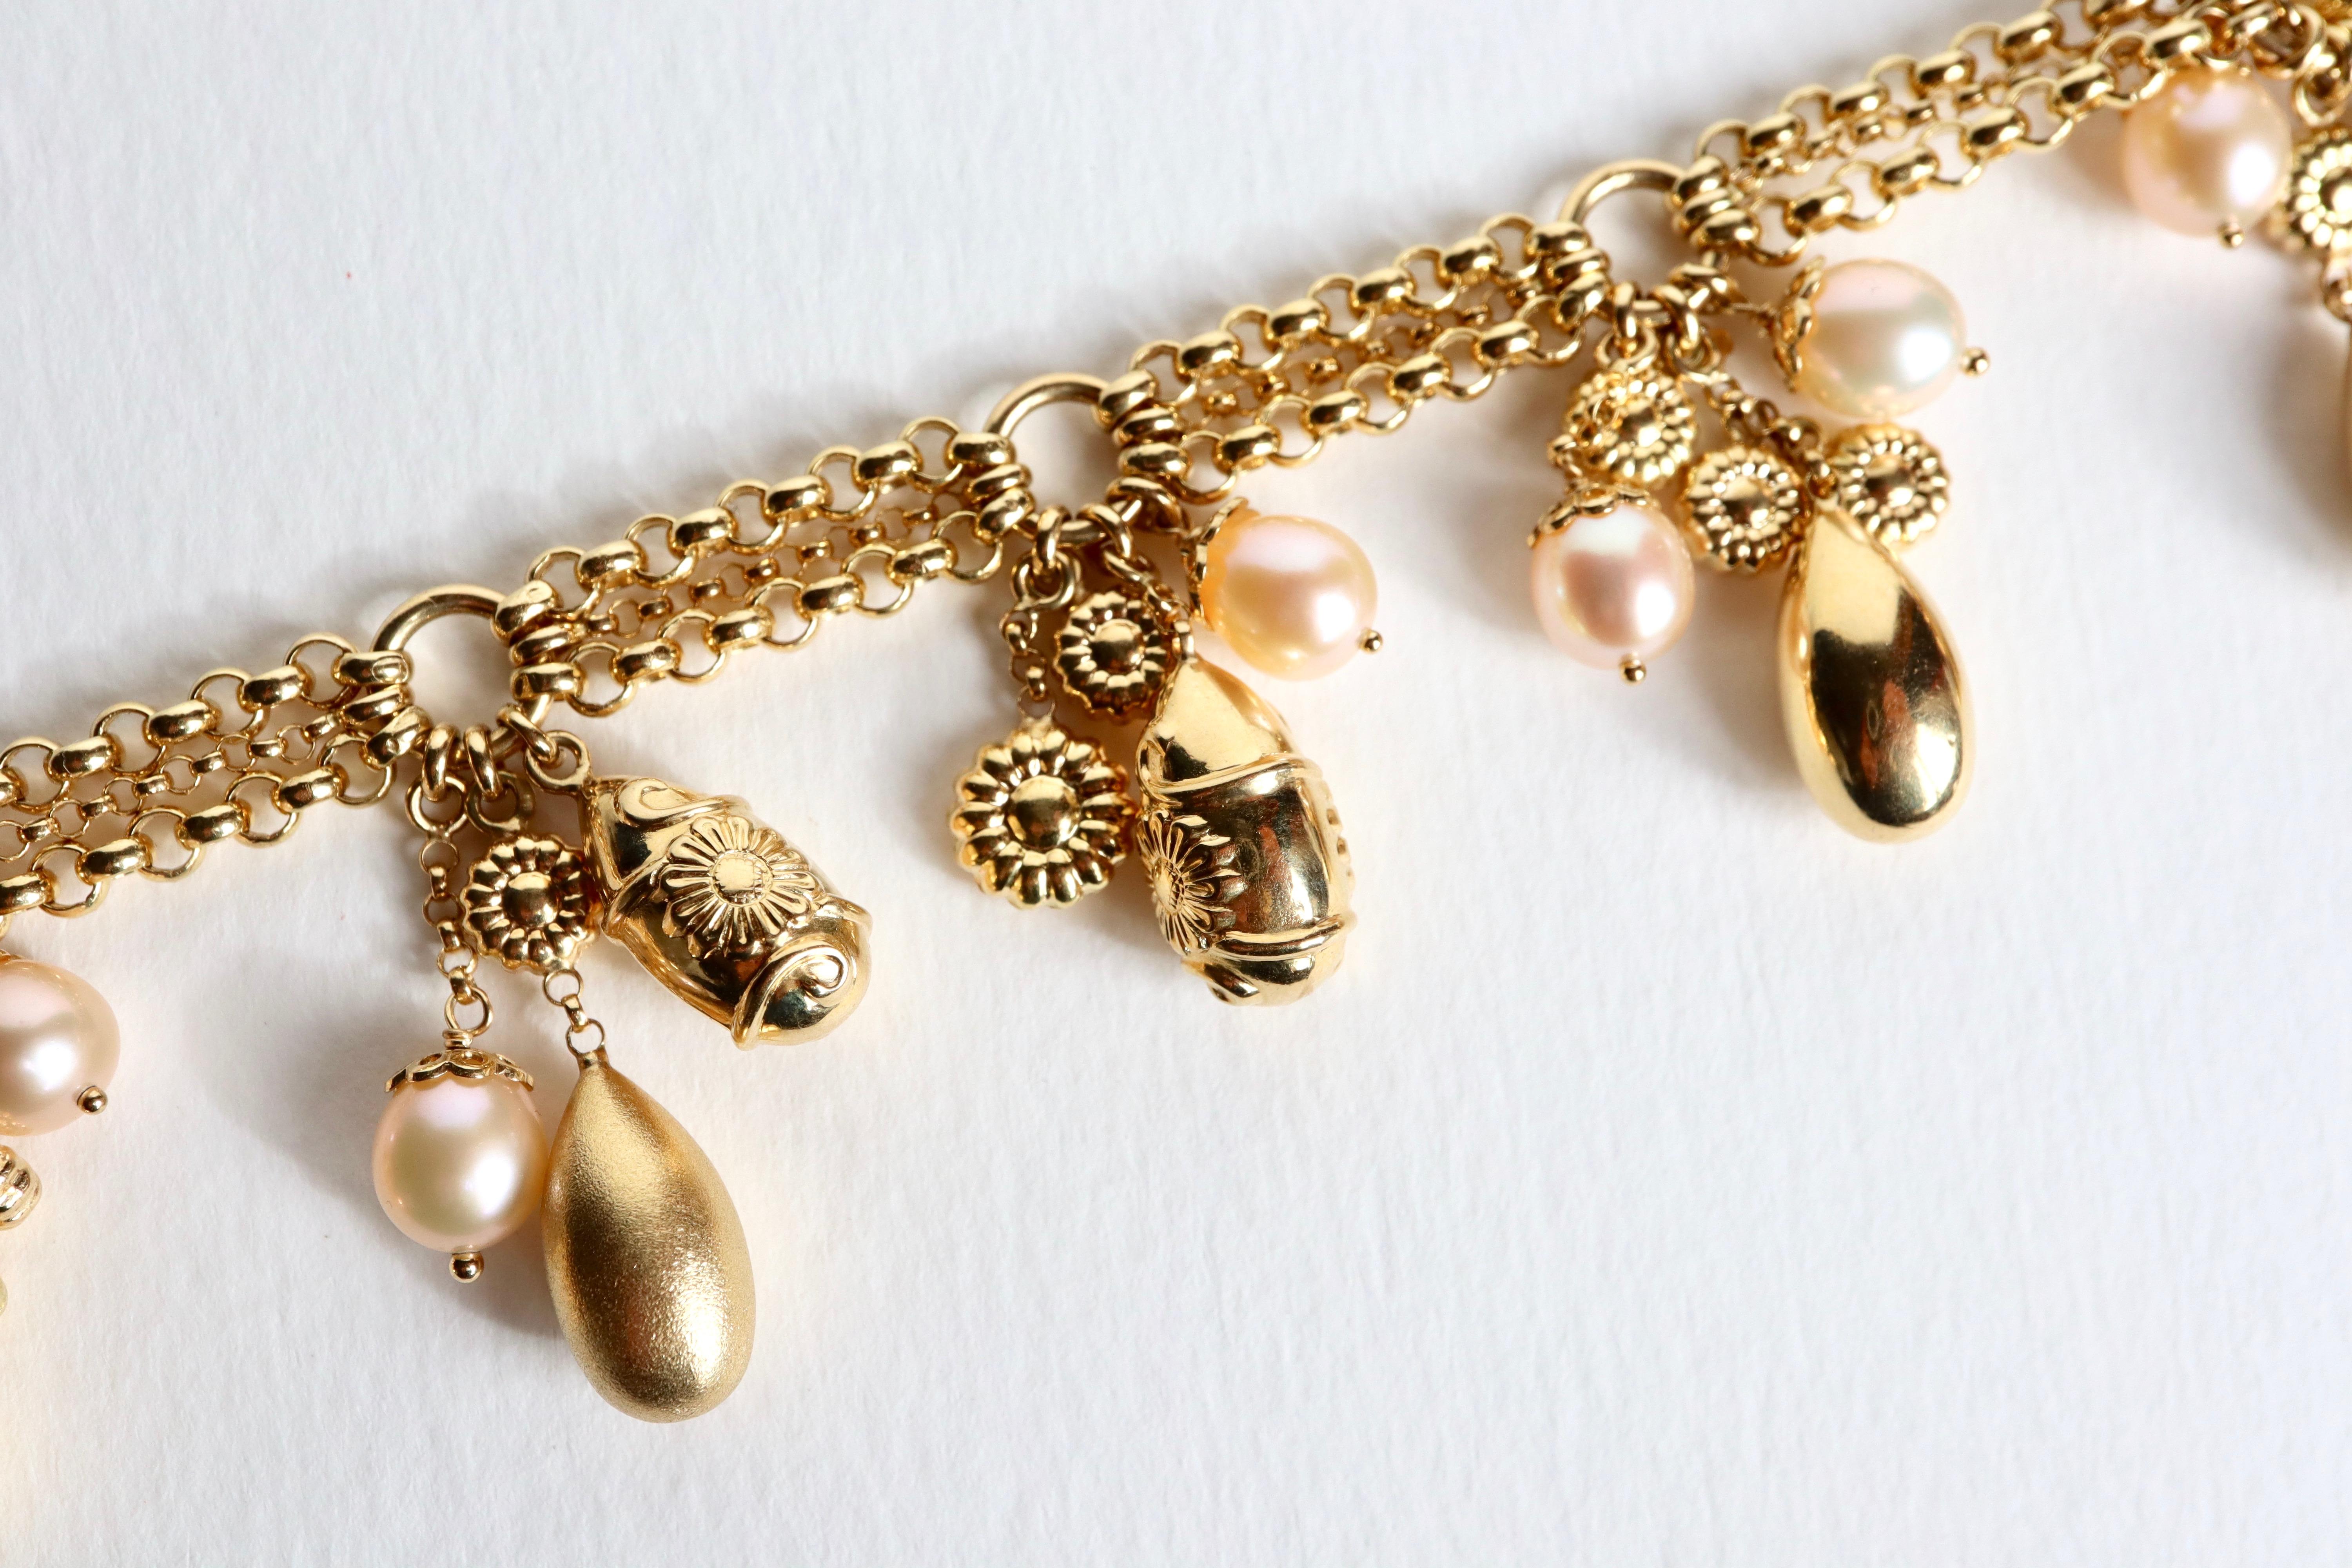 Charm bracelet in 18 carat yellow gold 3 alternating chains of chiseled circles holding 6 groups of charms including: pearls, gold eggs and flower motifs. Made in Italy
Stick clasp. Eagle Head Hallmark. 
Length: 19 Cm Height of charms: 3.3 cm Chain